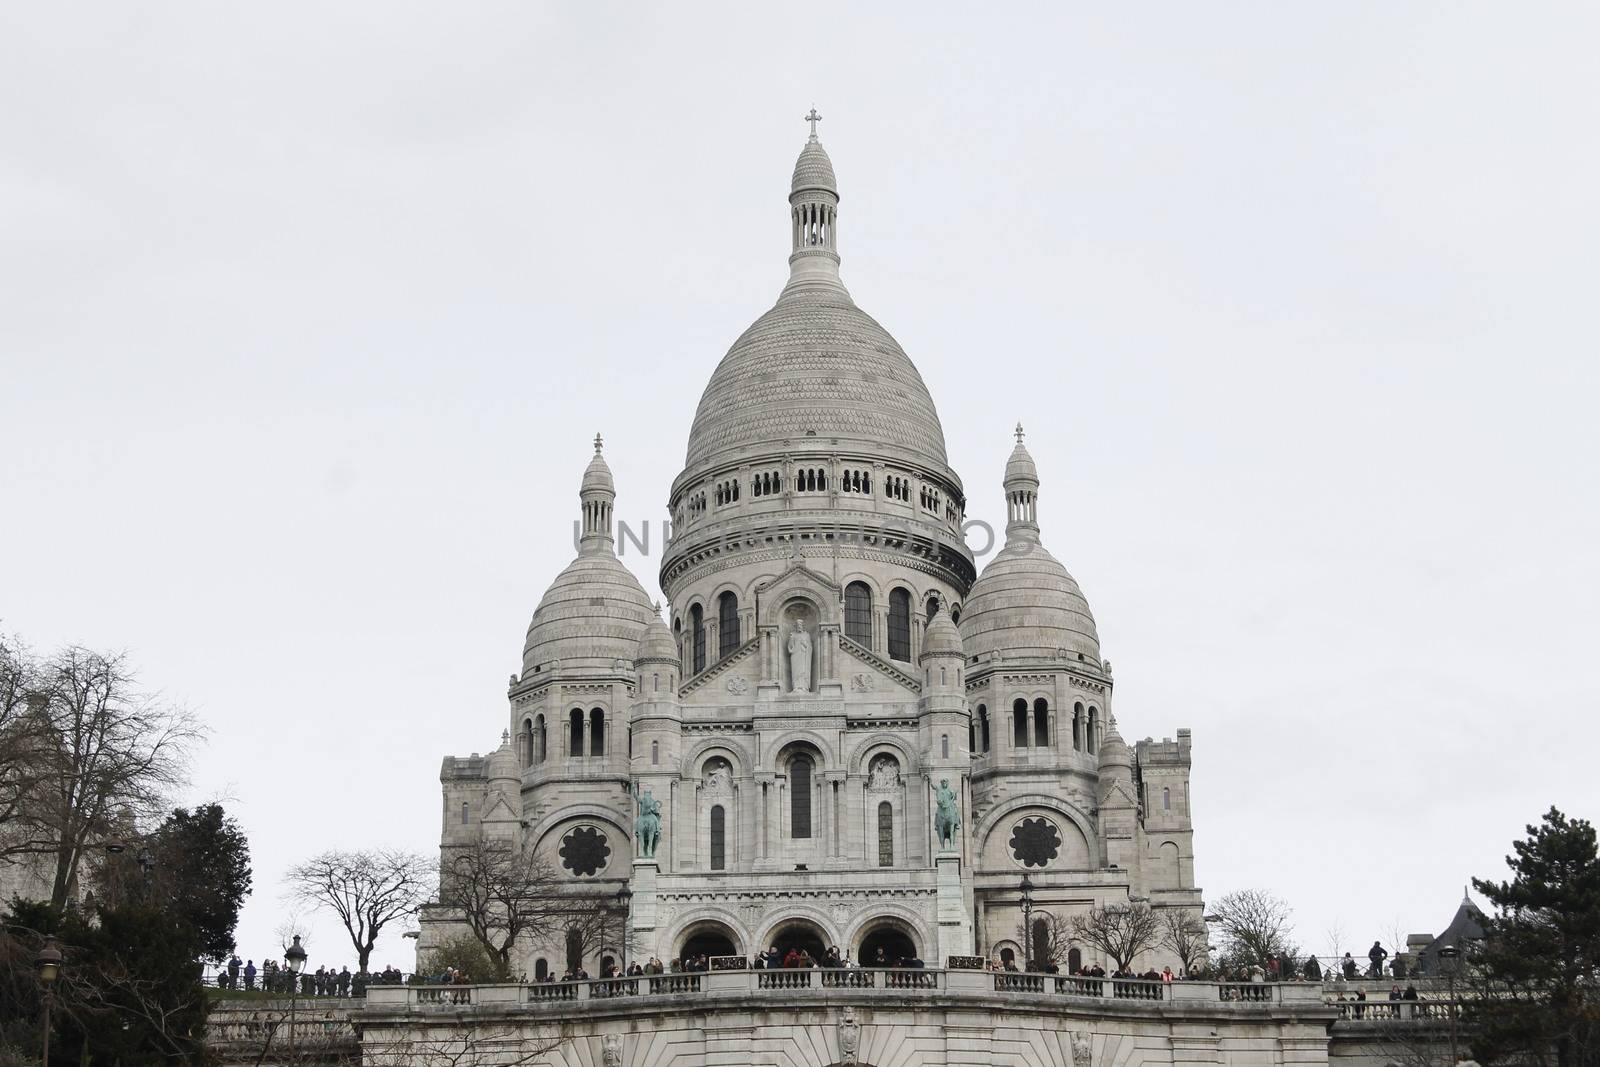 Basilica of the Sacre Coeur by marcobir